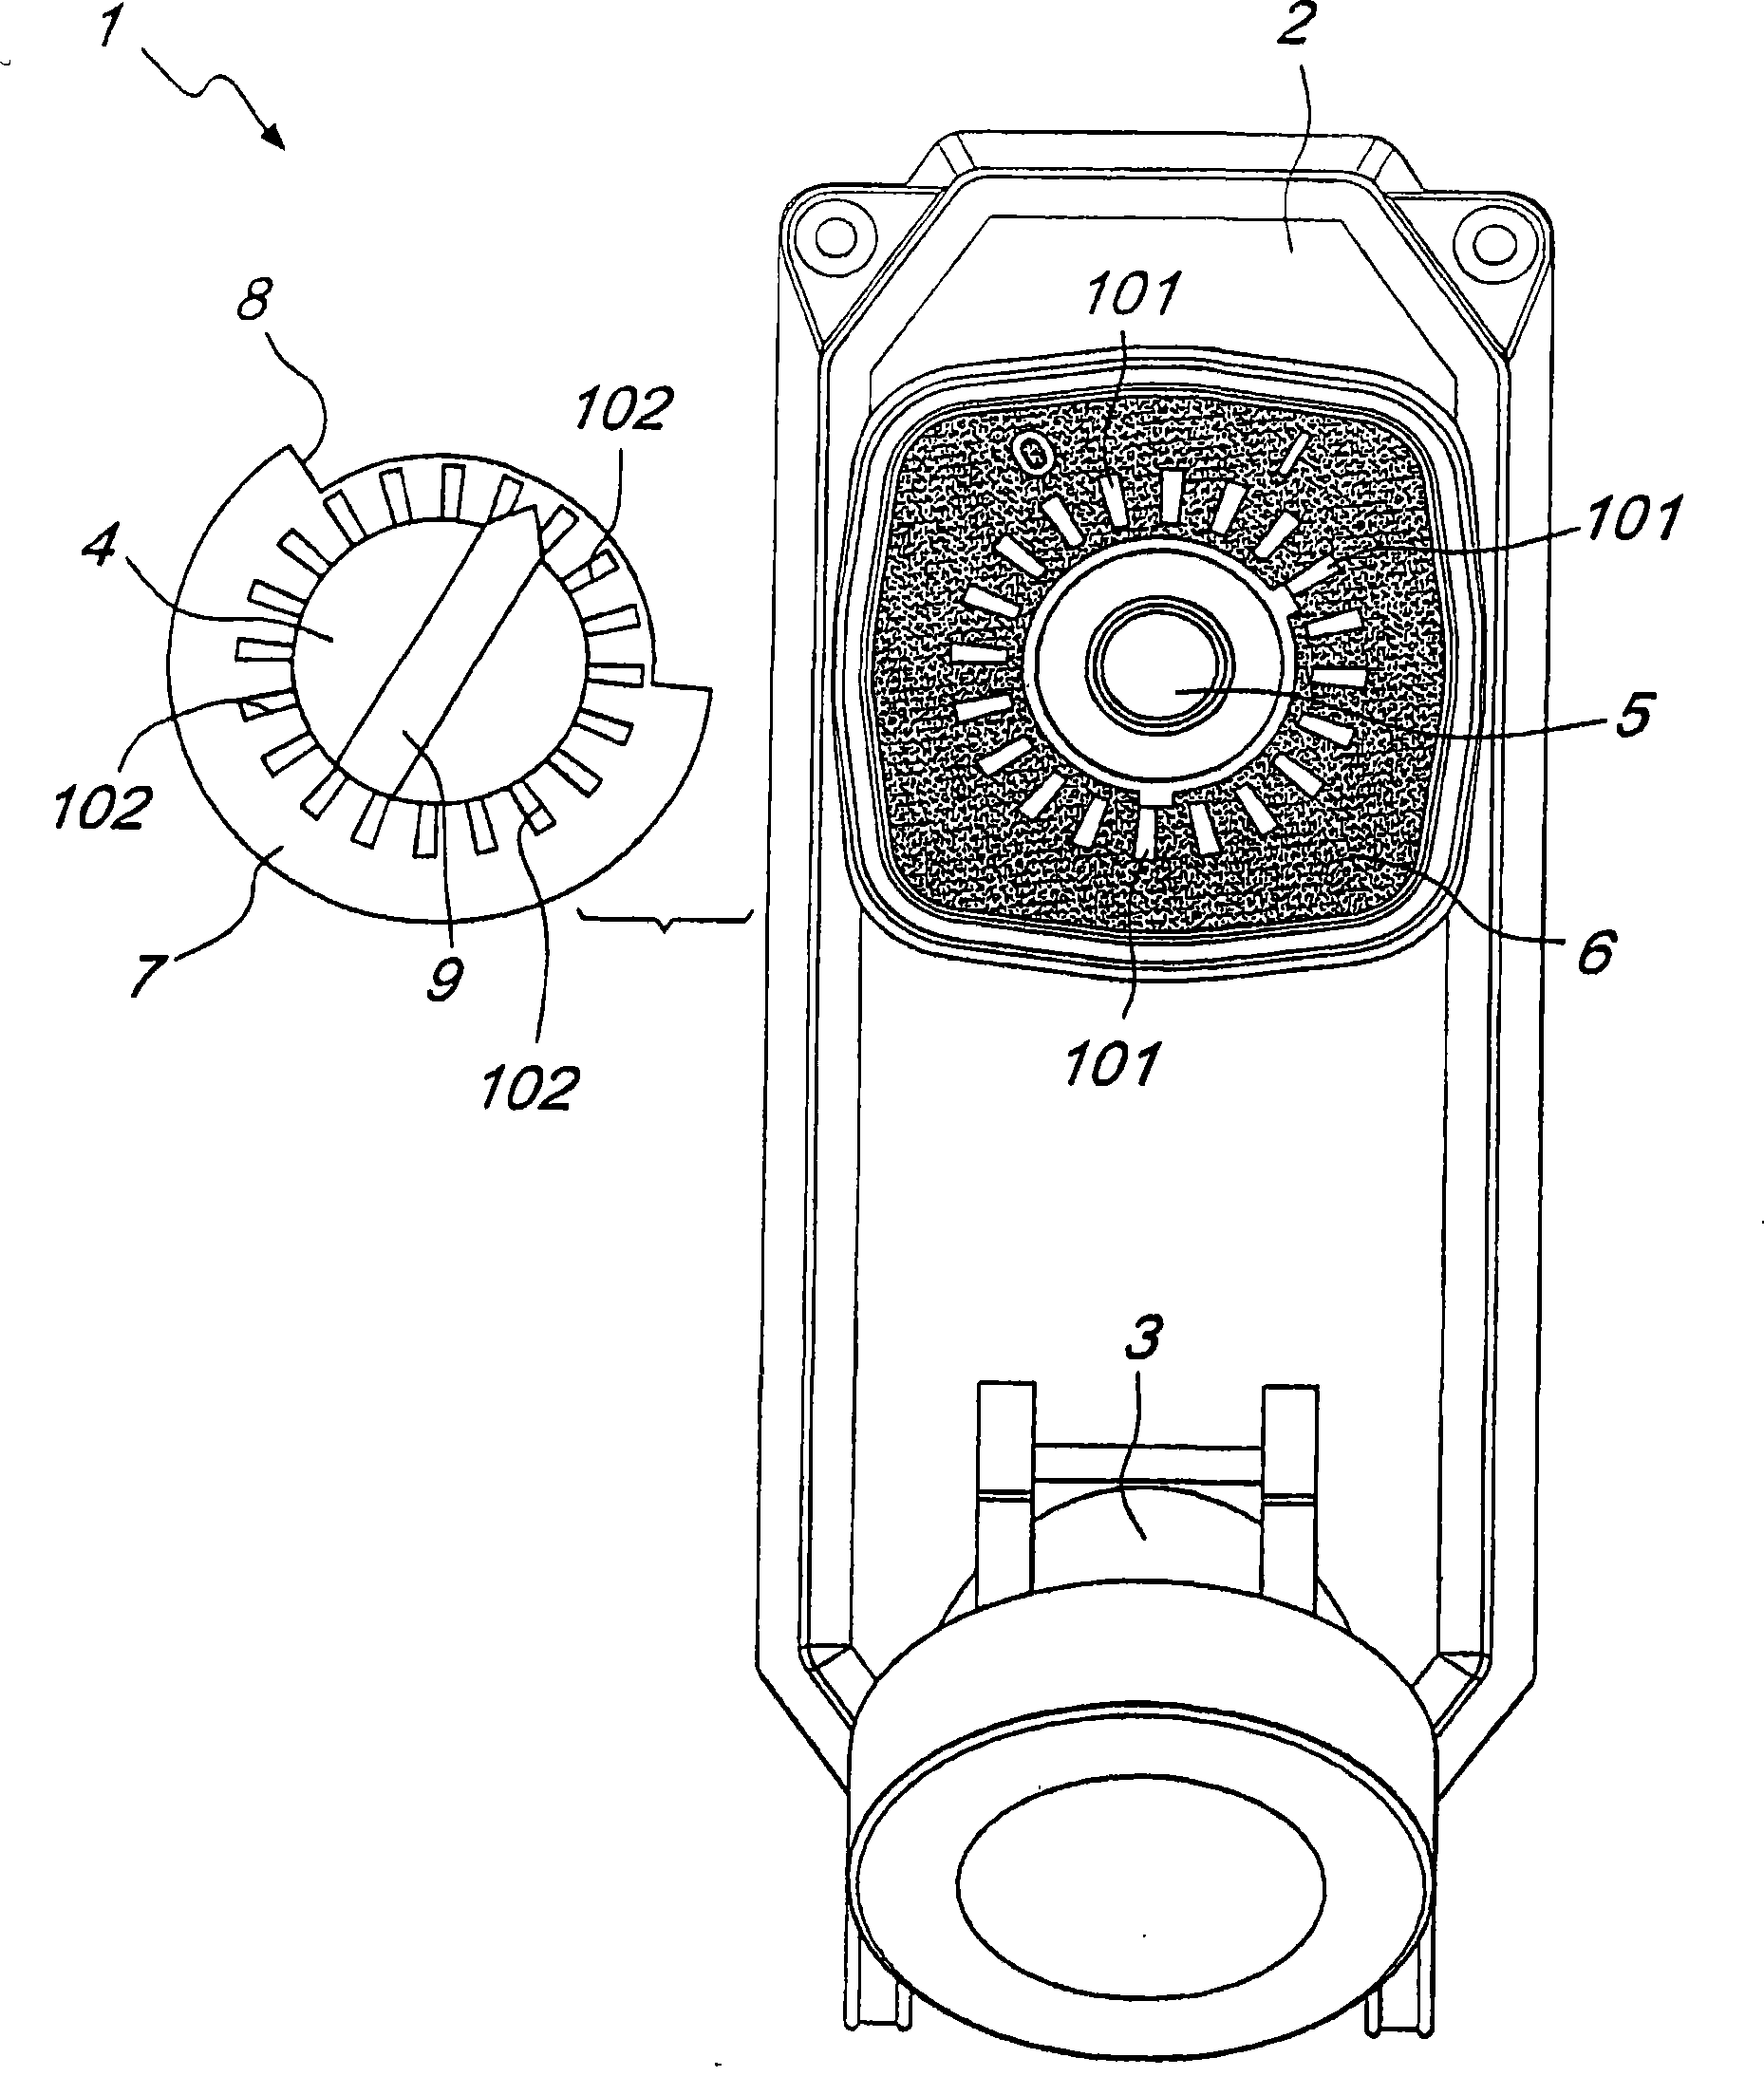 Control assembly for interlocked sockets